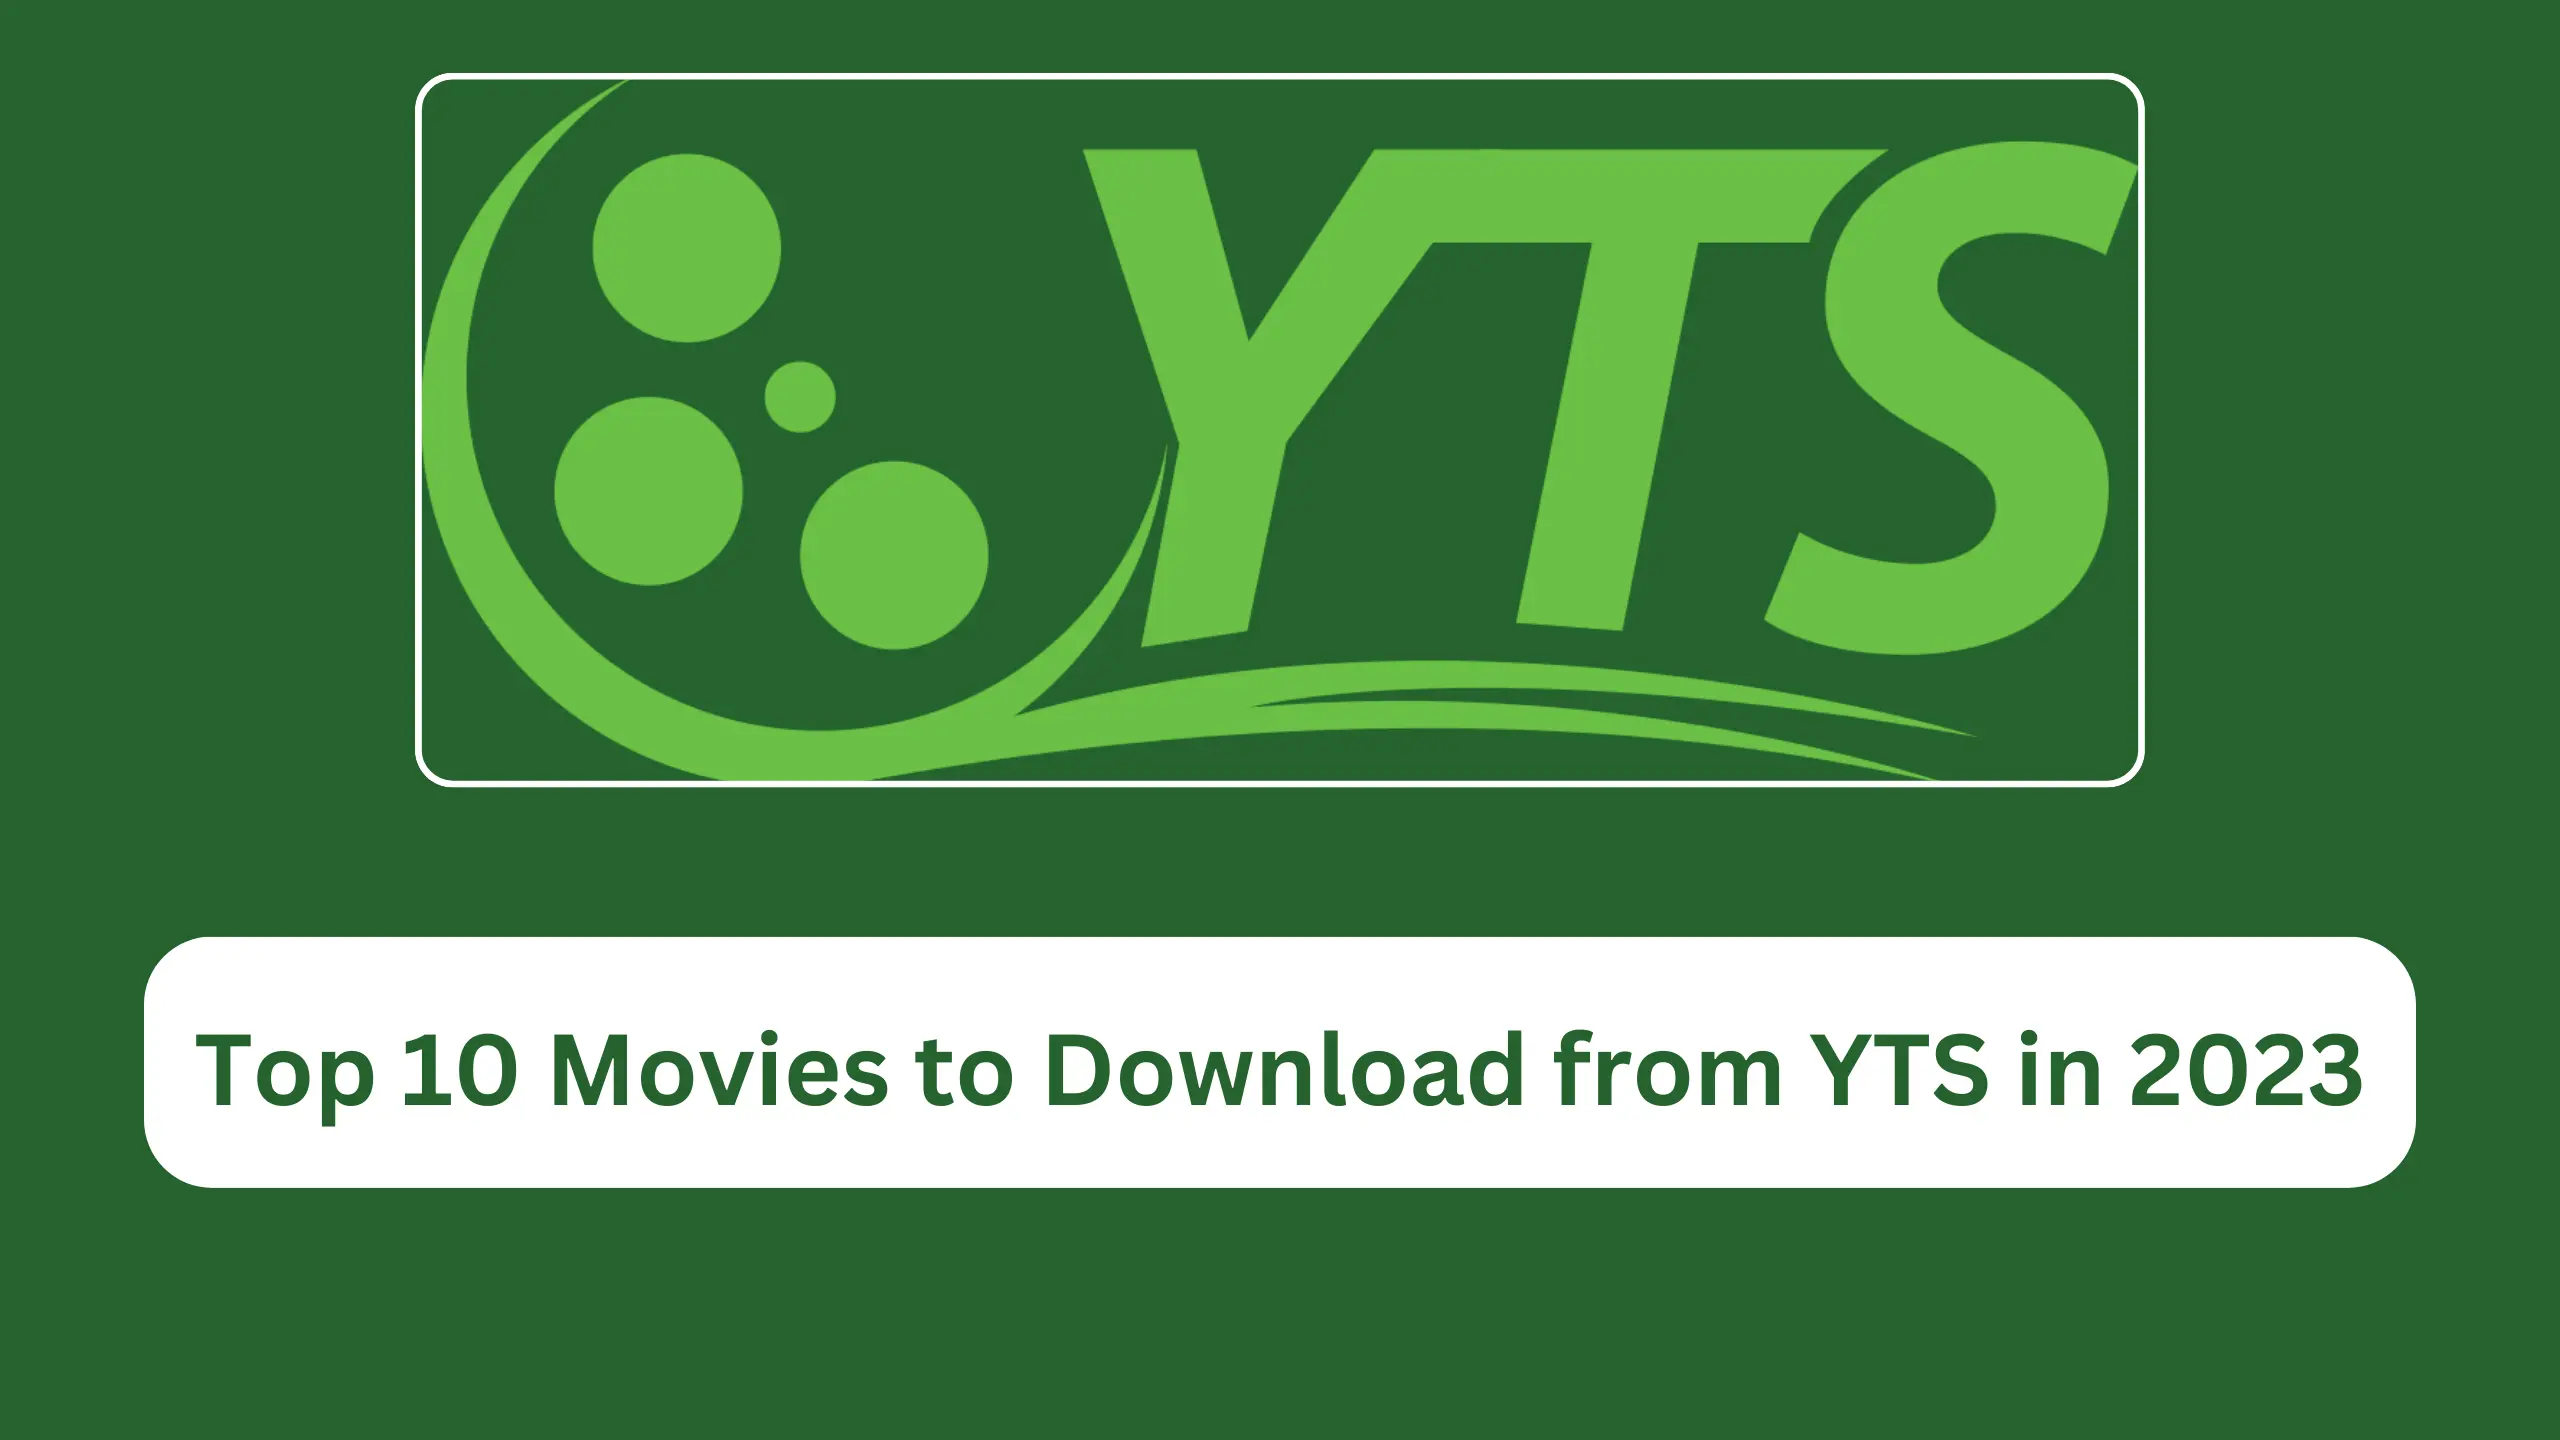 Top 10 Movies to Download from YTS in 2023